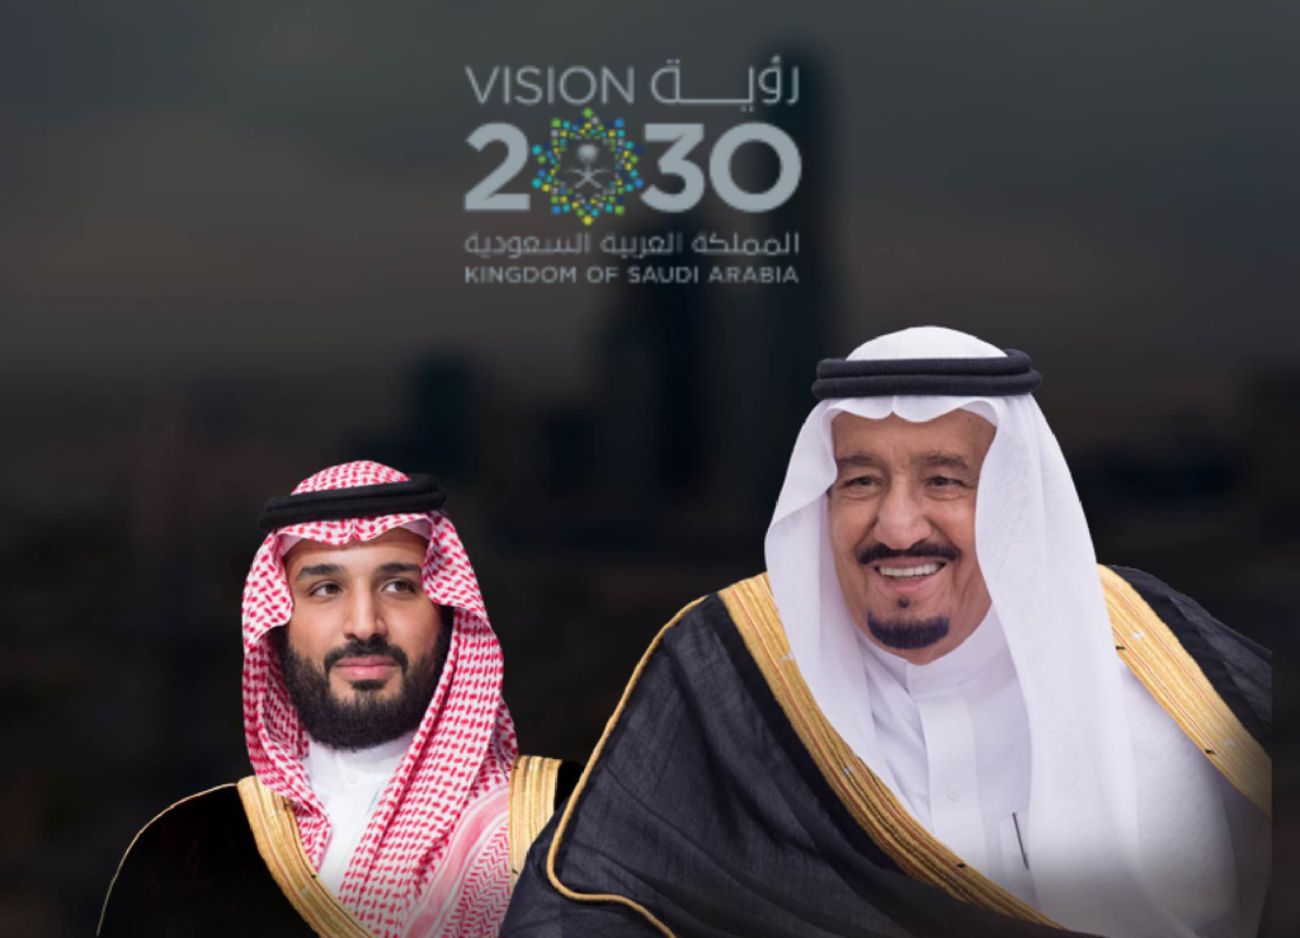 <p>At the core of the Neom, an extensive development project launched by Crown Prince Bin Salman, is a futuristic city once predicted to run over 105 miles long known as The Line. </p> <p>However, the plans for the desert metropolis appear to have been scaled back, with rumors suggesting the city will only stretch for a mile and a half by 2030. </p>